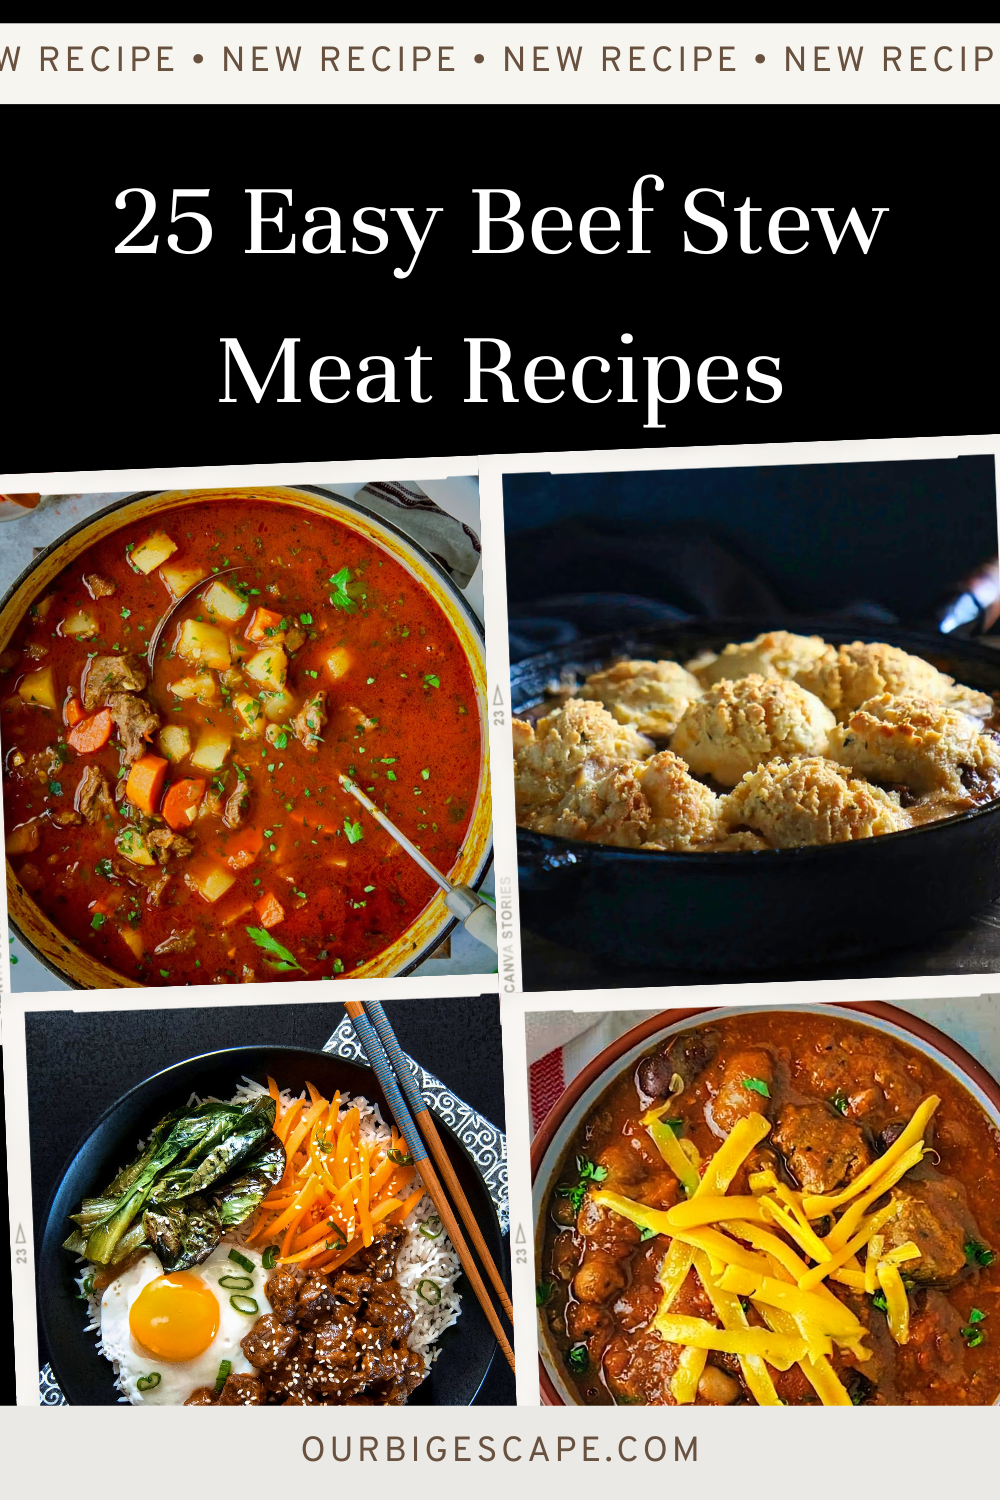 25 Easy Beef Stew Meat Recipes